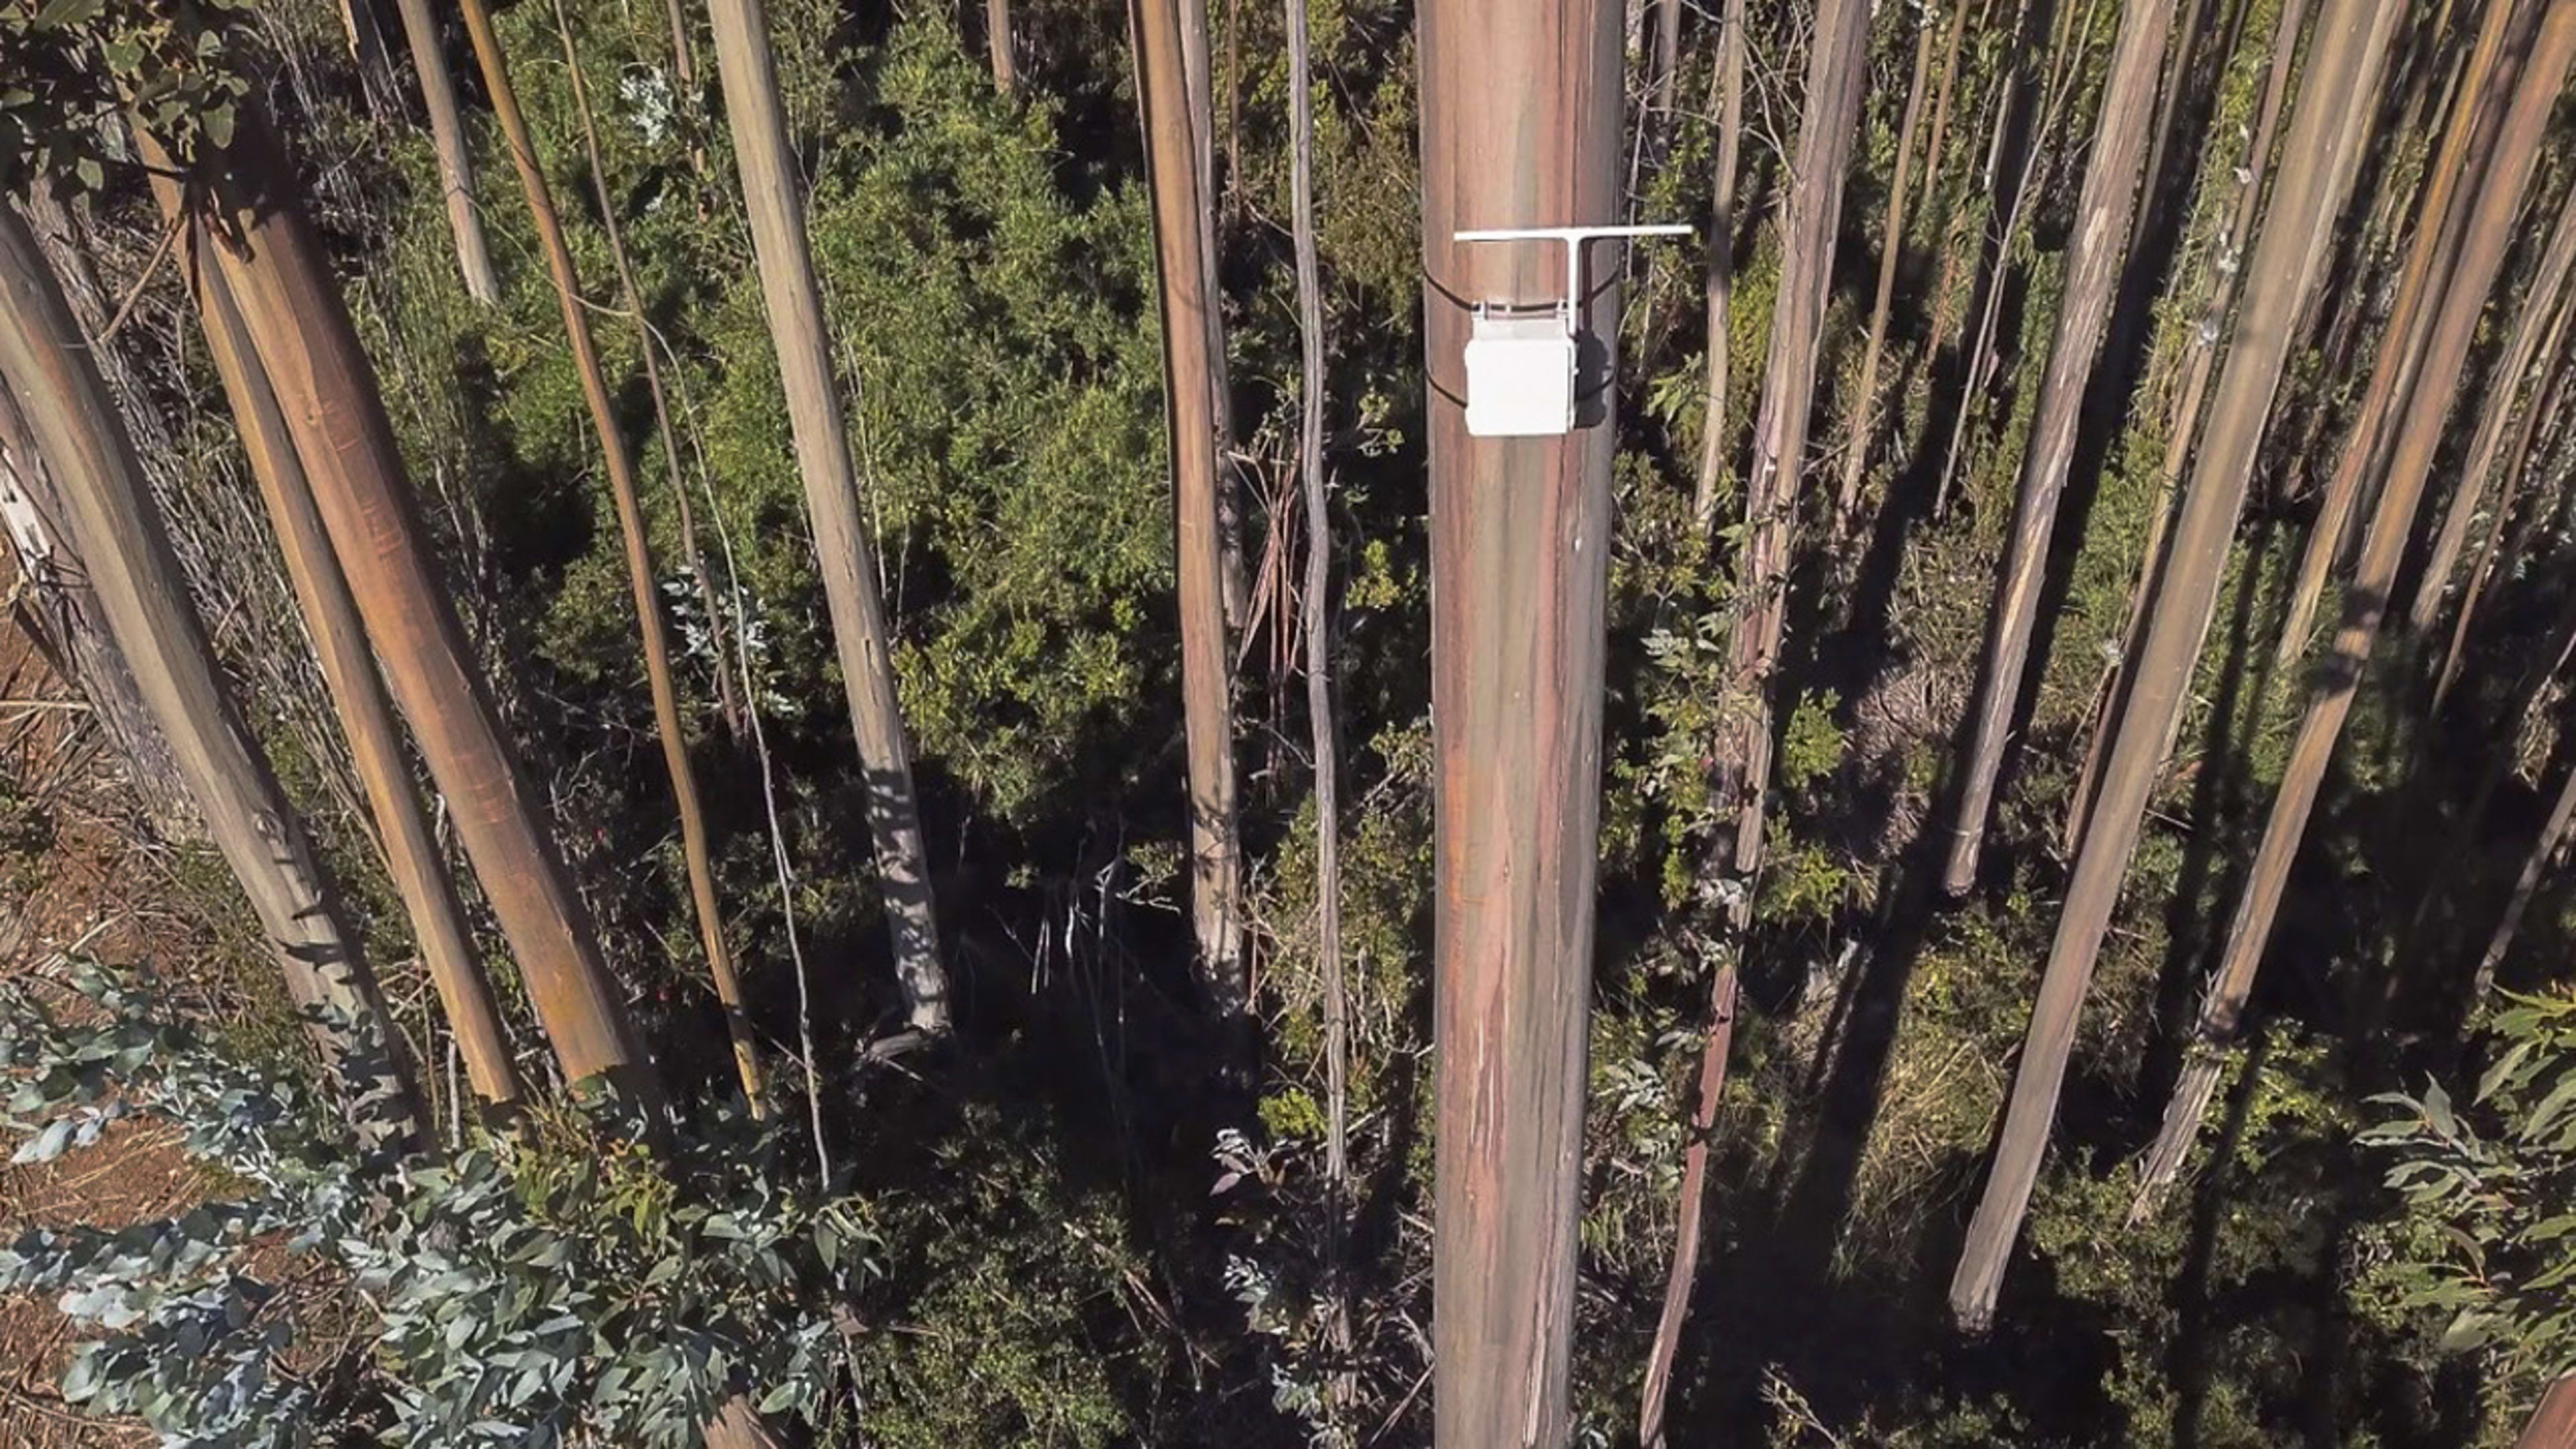 These “digital noses” in trees sniff the air for forest fires